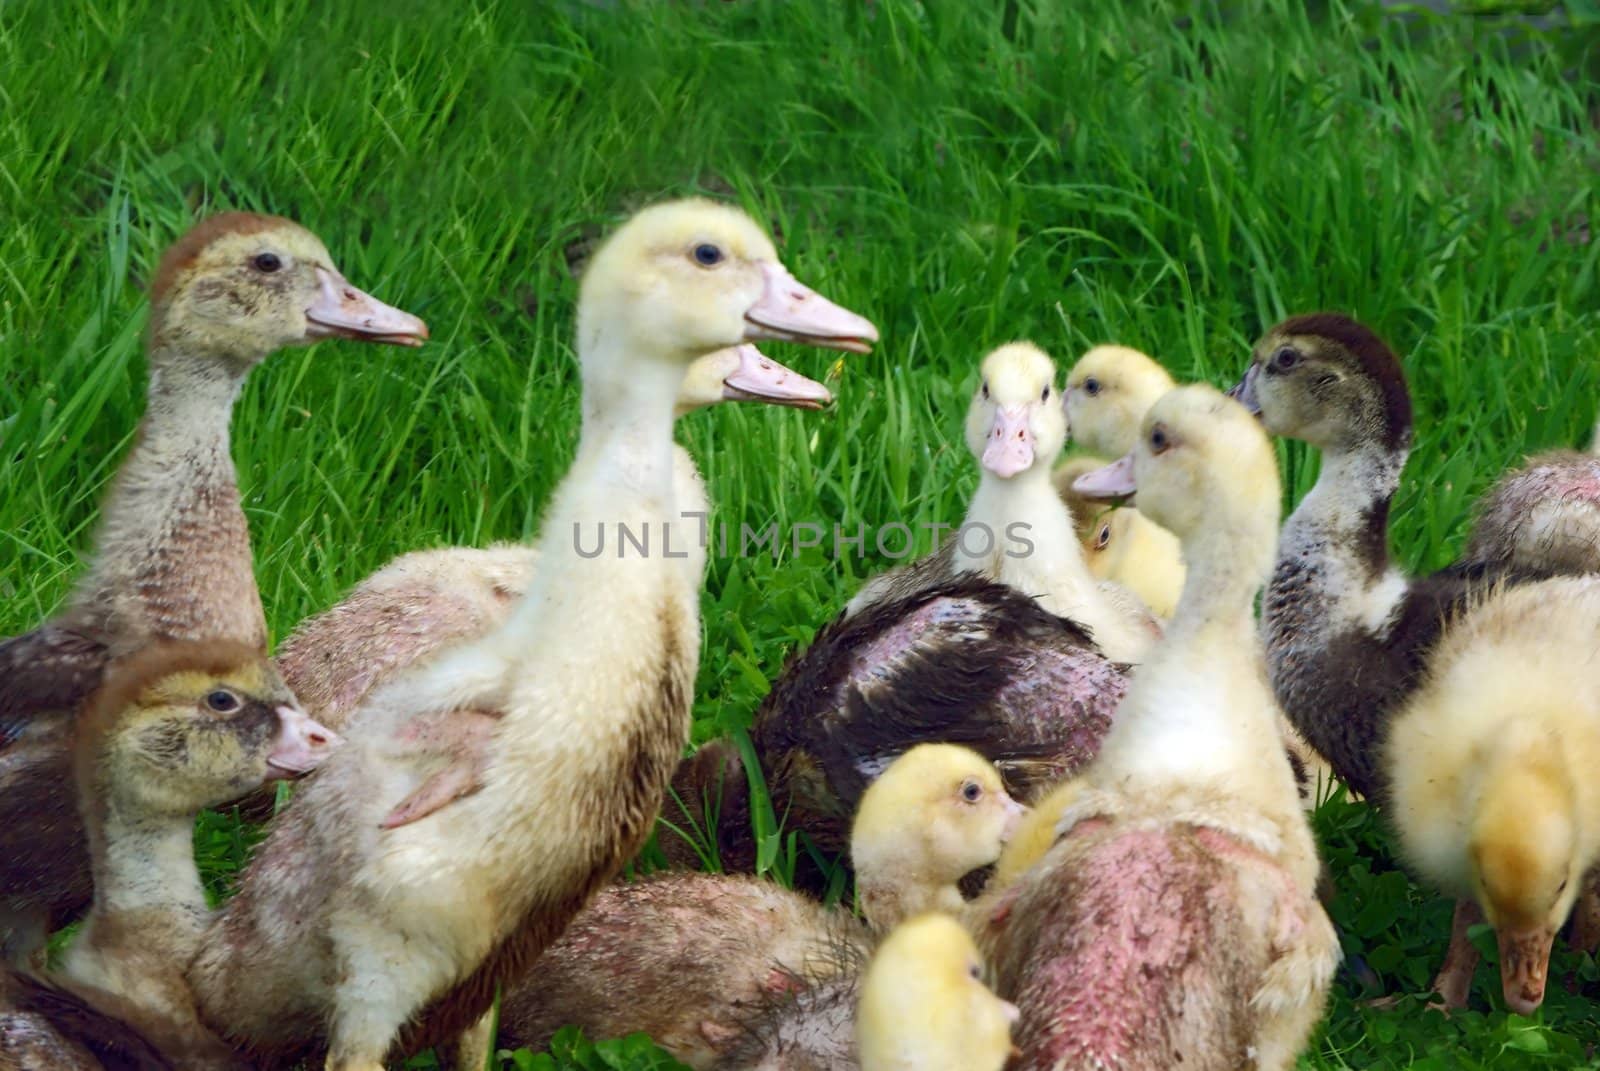  Ducklings and goslings walking on the fresh green lawn